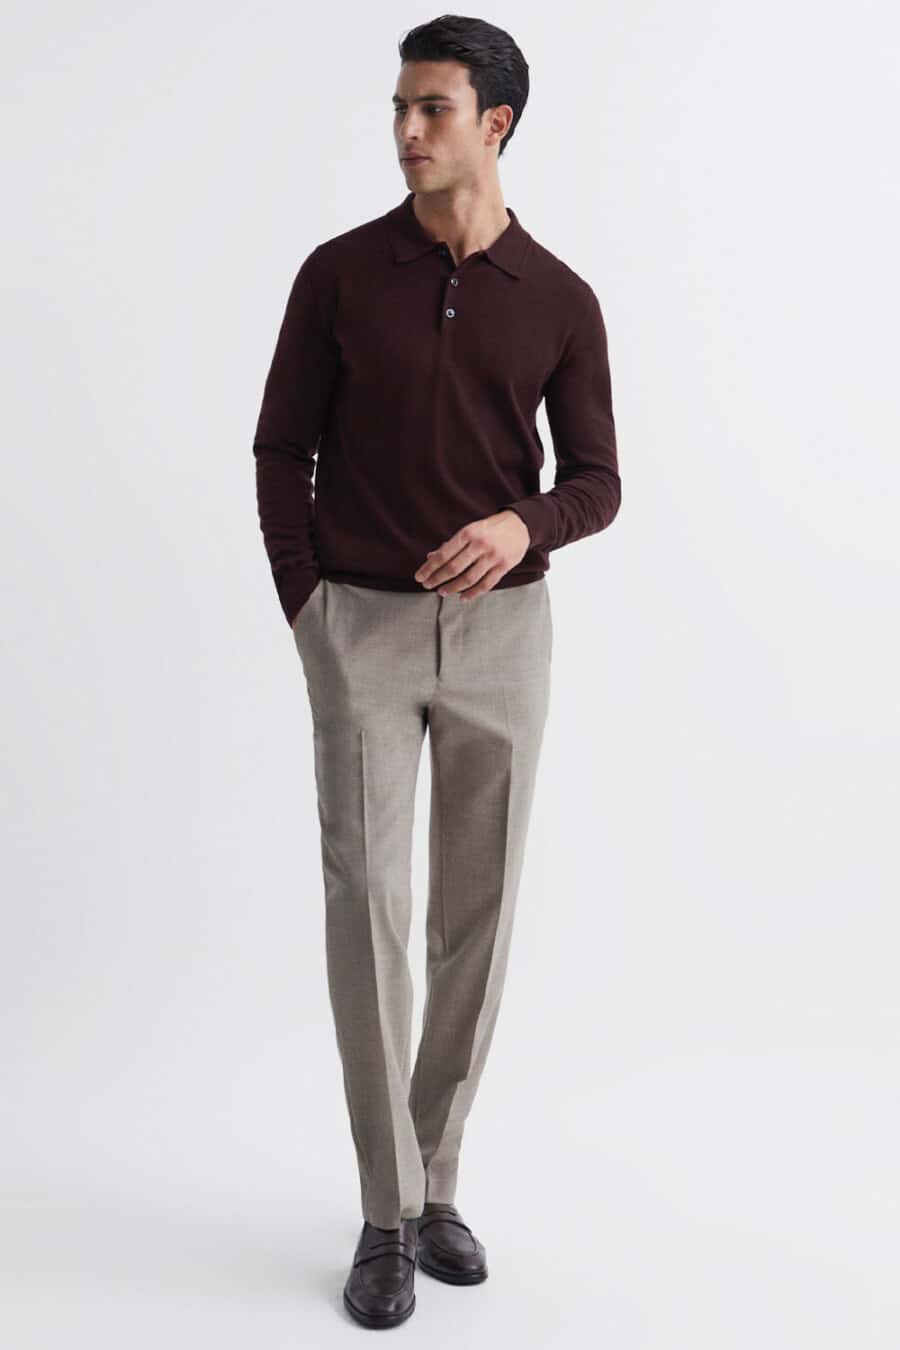 Men's brown tailored trosuers, burgundy knitted polo shirt and brown leather penny loafers outfit